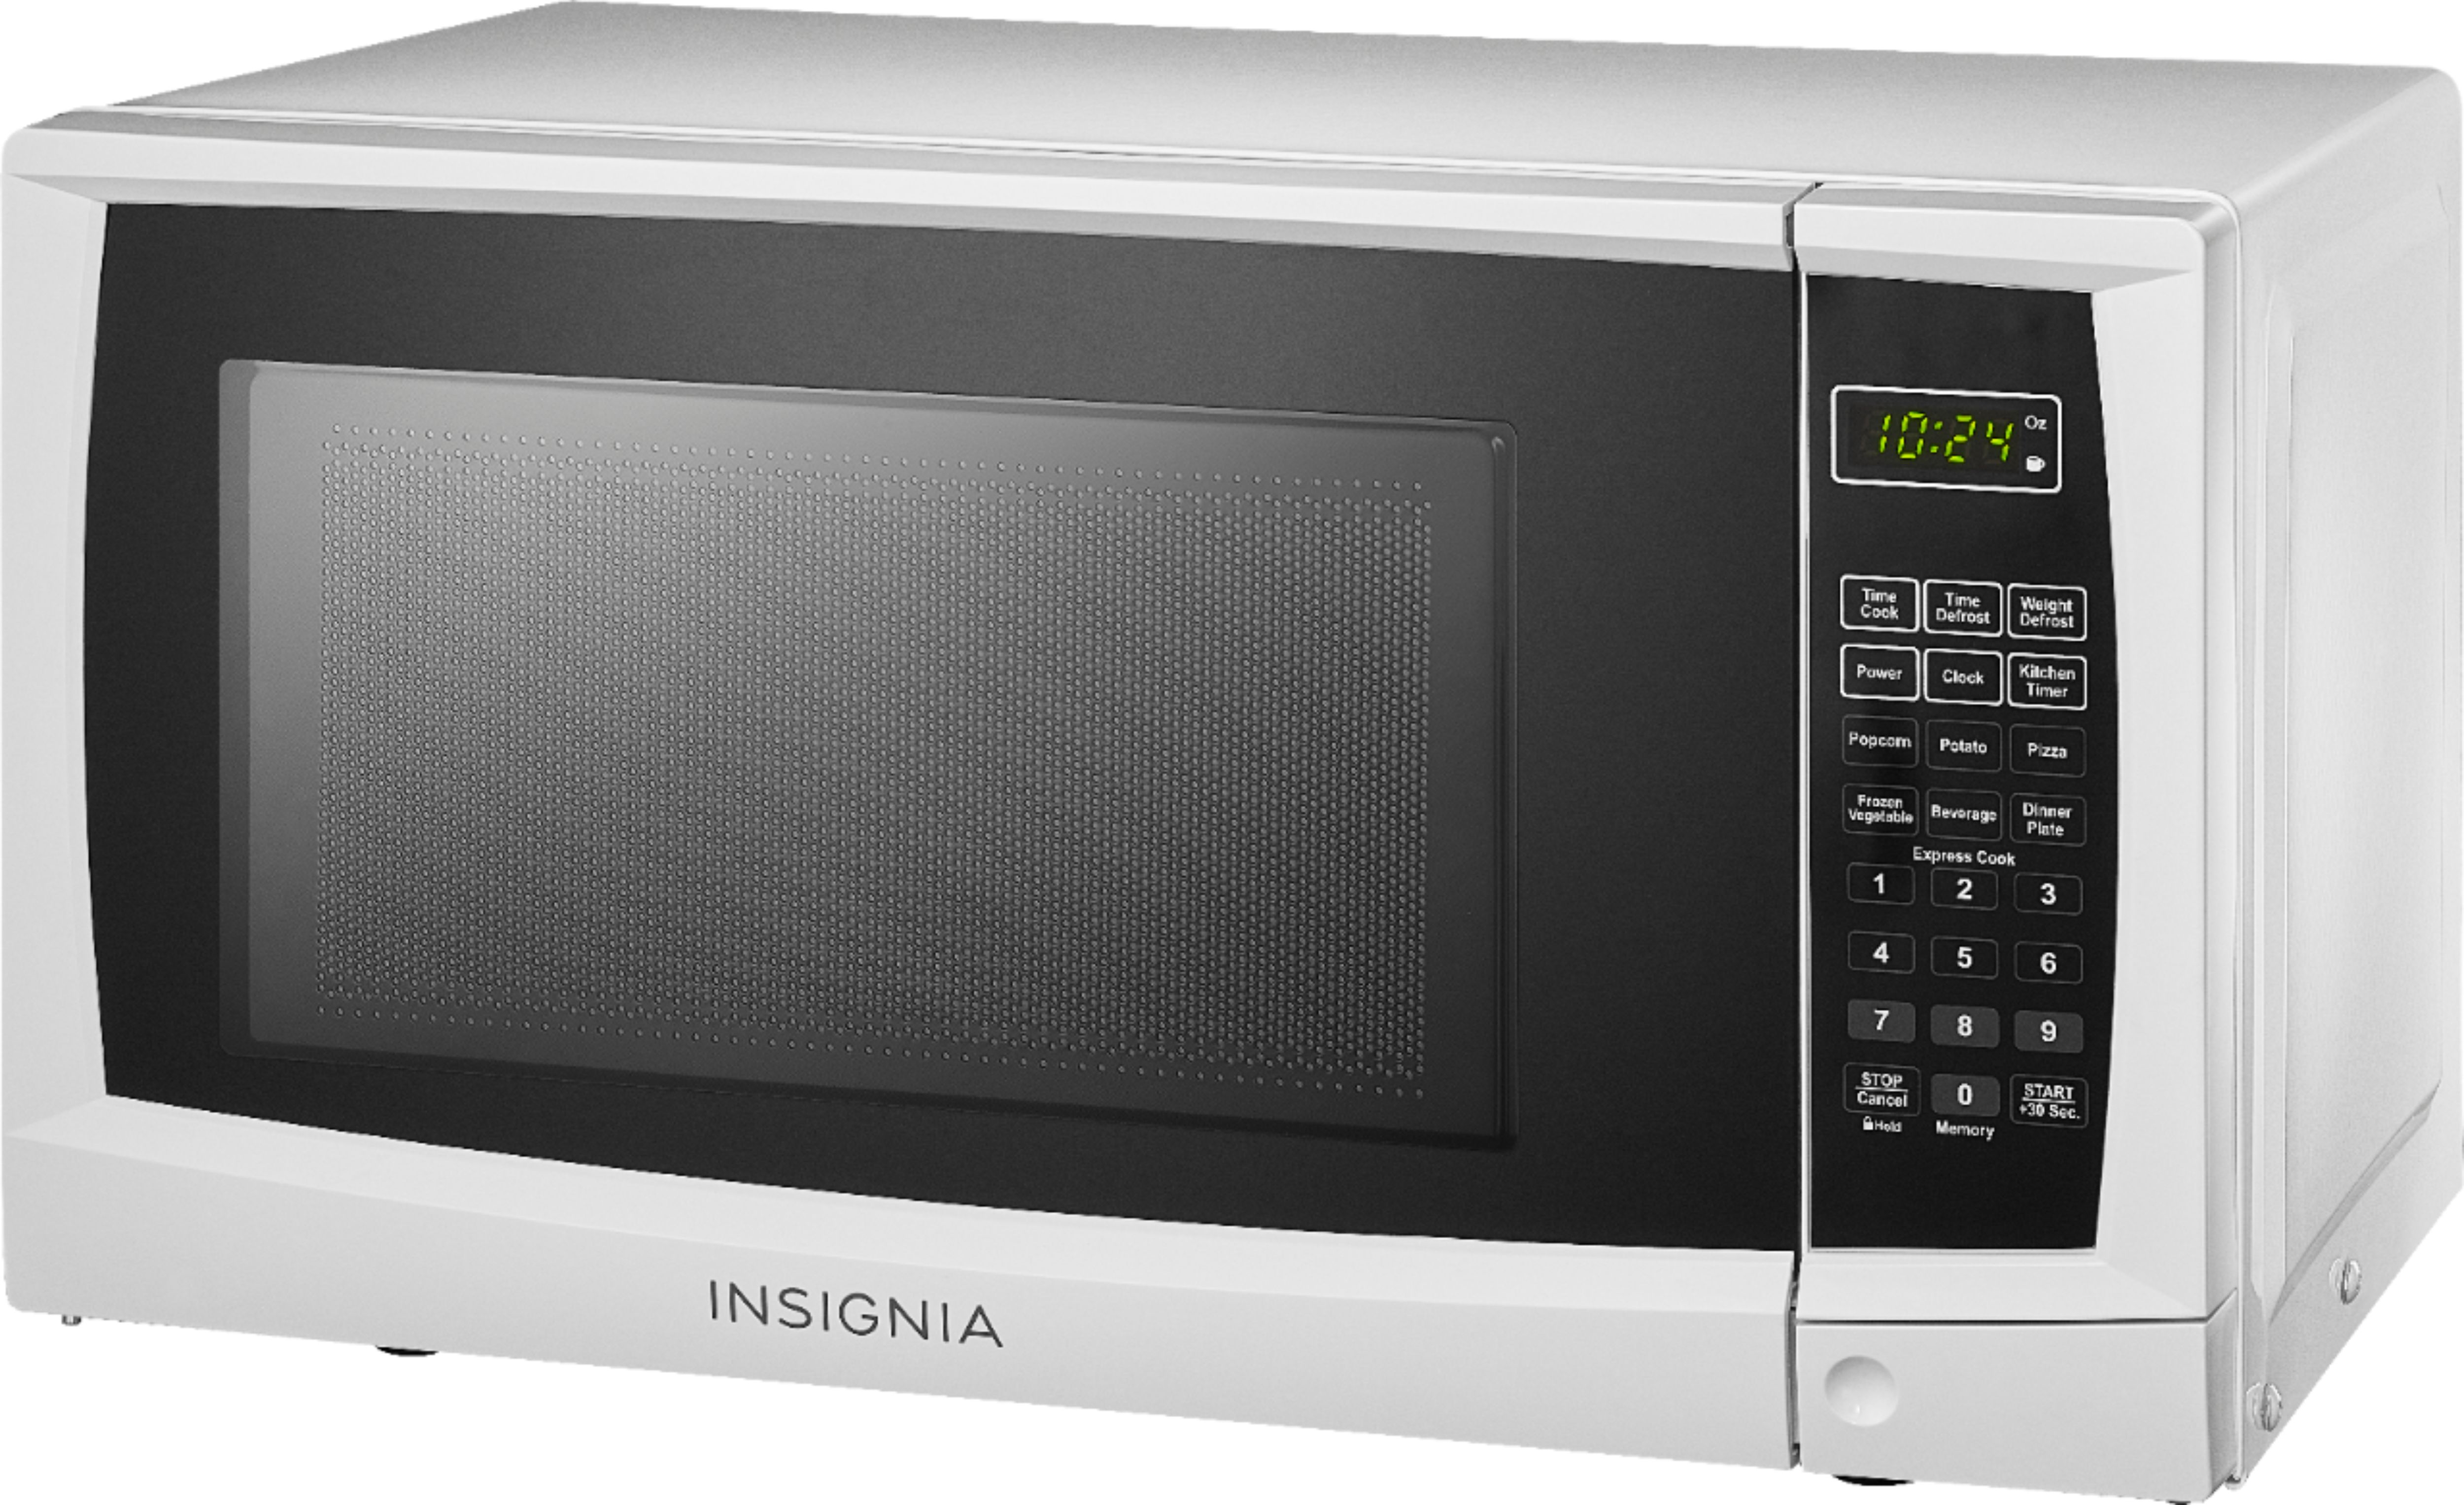 Compact Microwave Oven - White